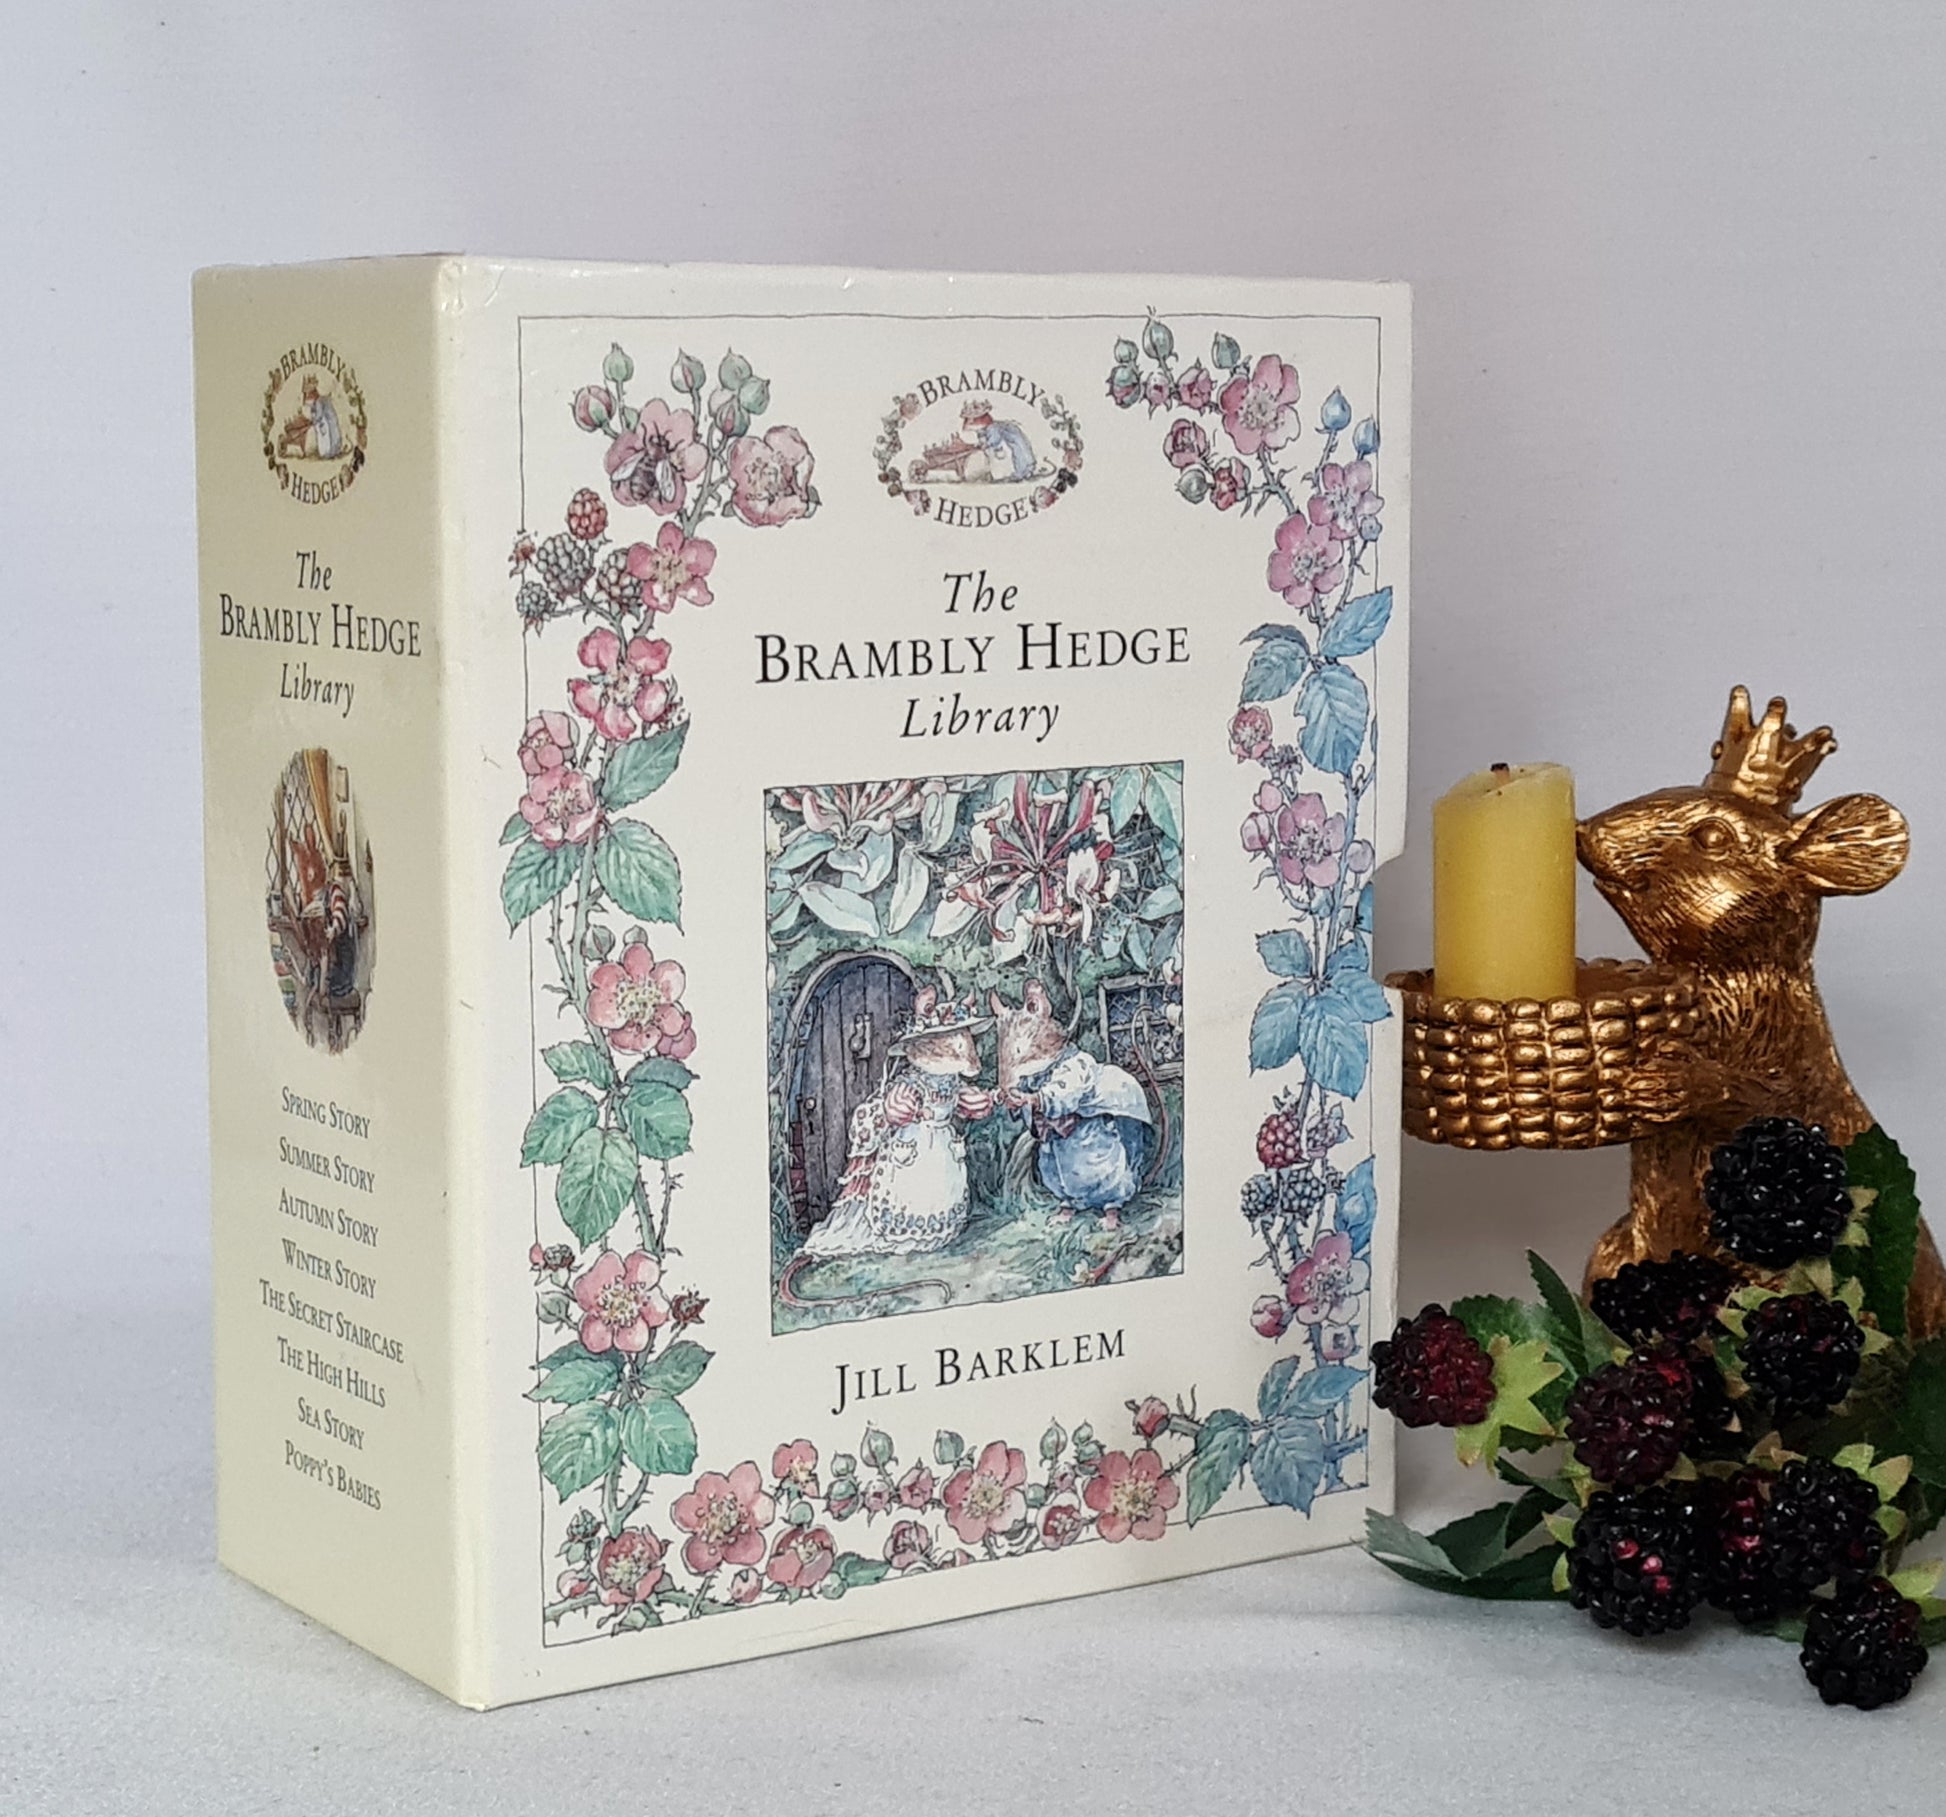 2000 The Brambly Hedge Collection by Jill Barklem / Spring, Summer, Au –  Bumper Box of Delights Bookshop